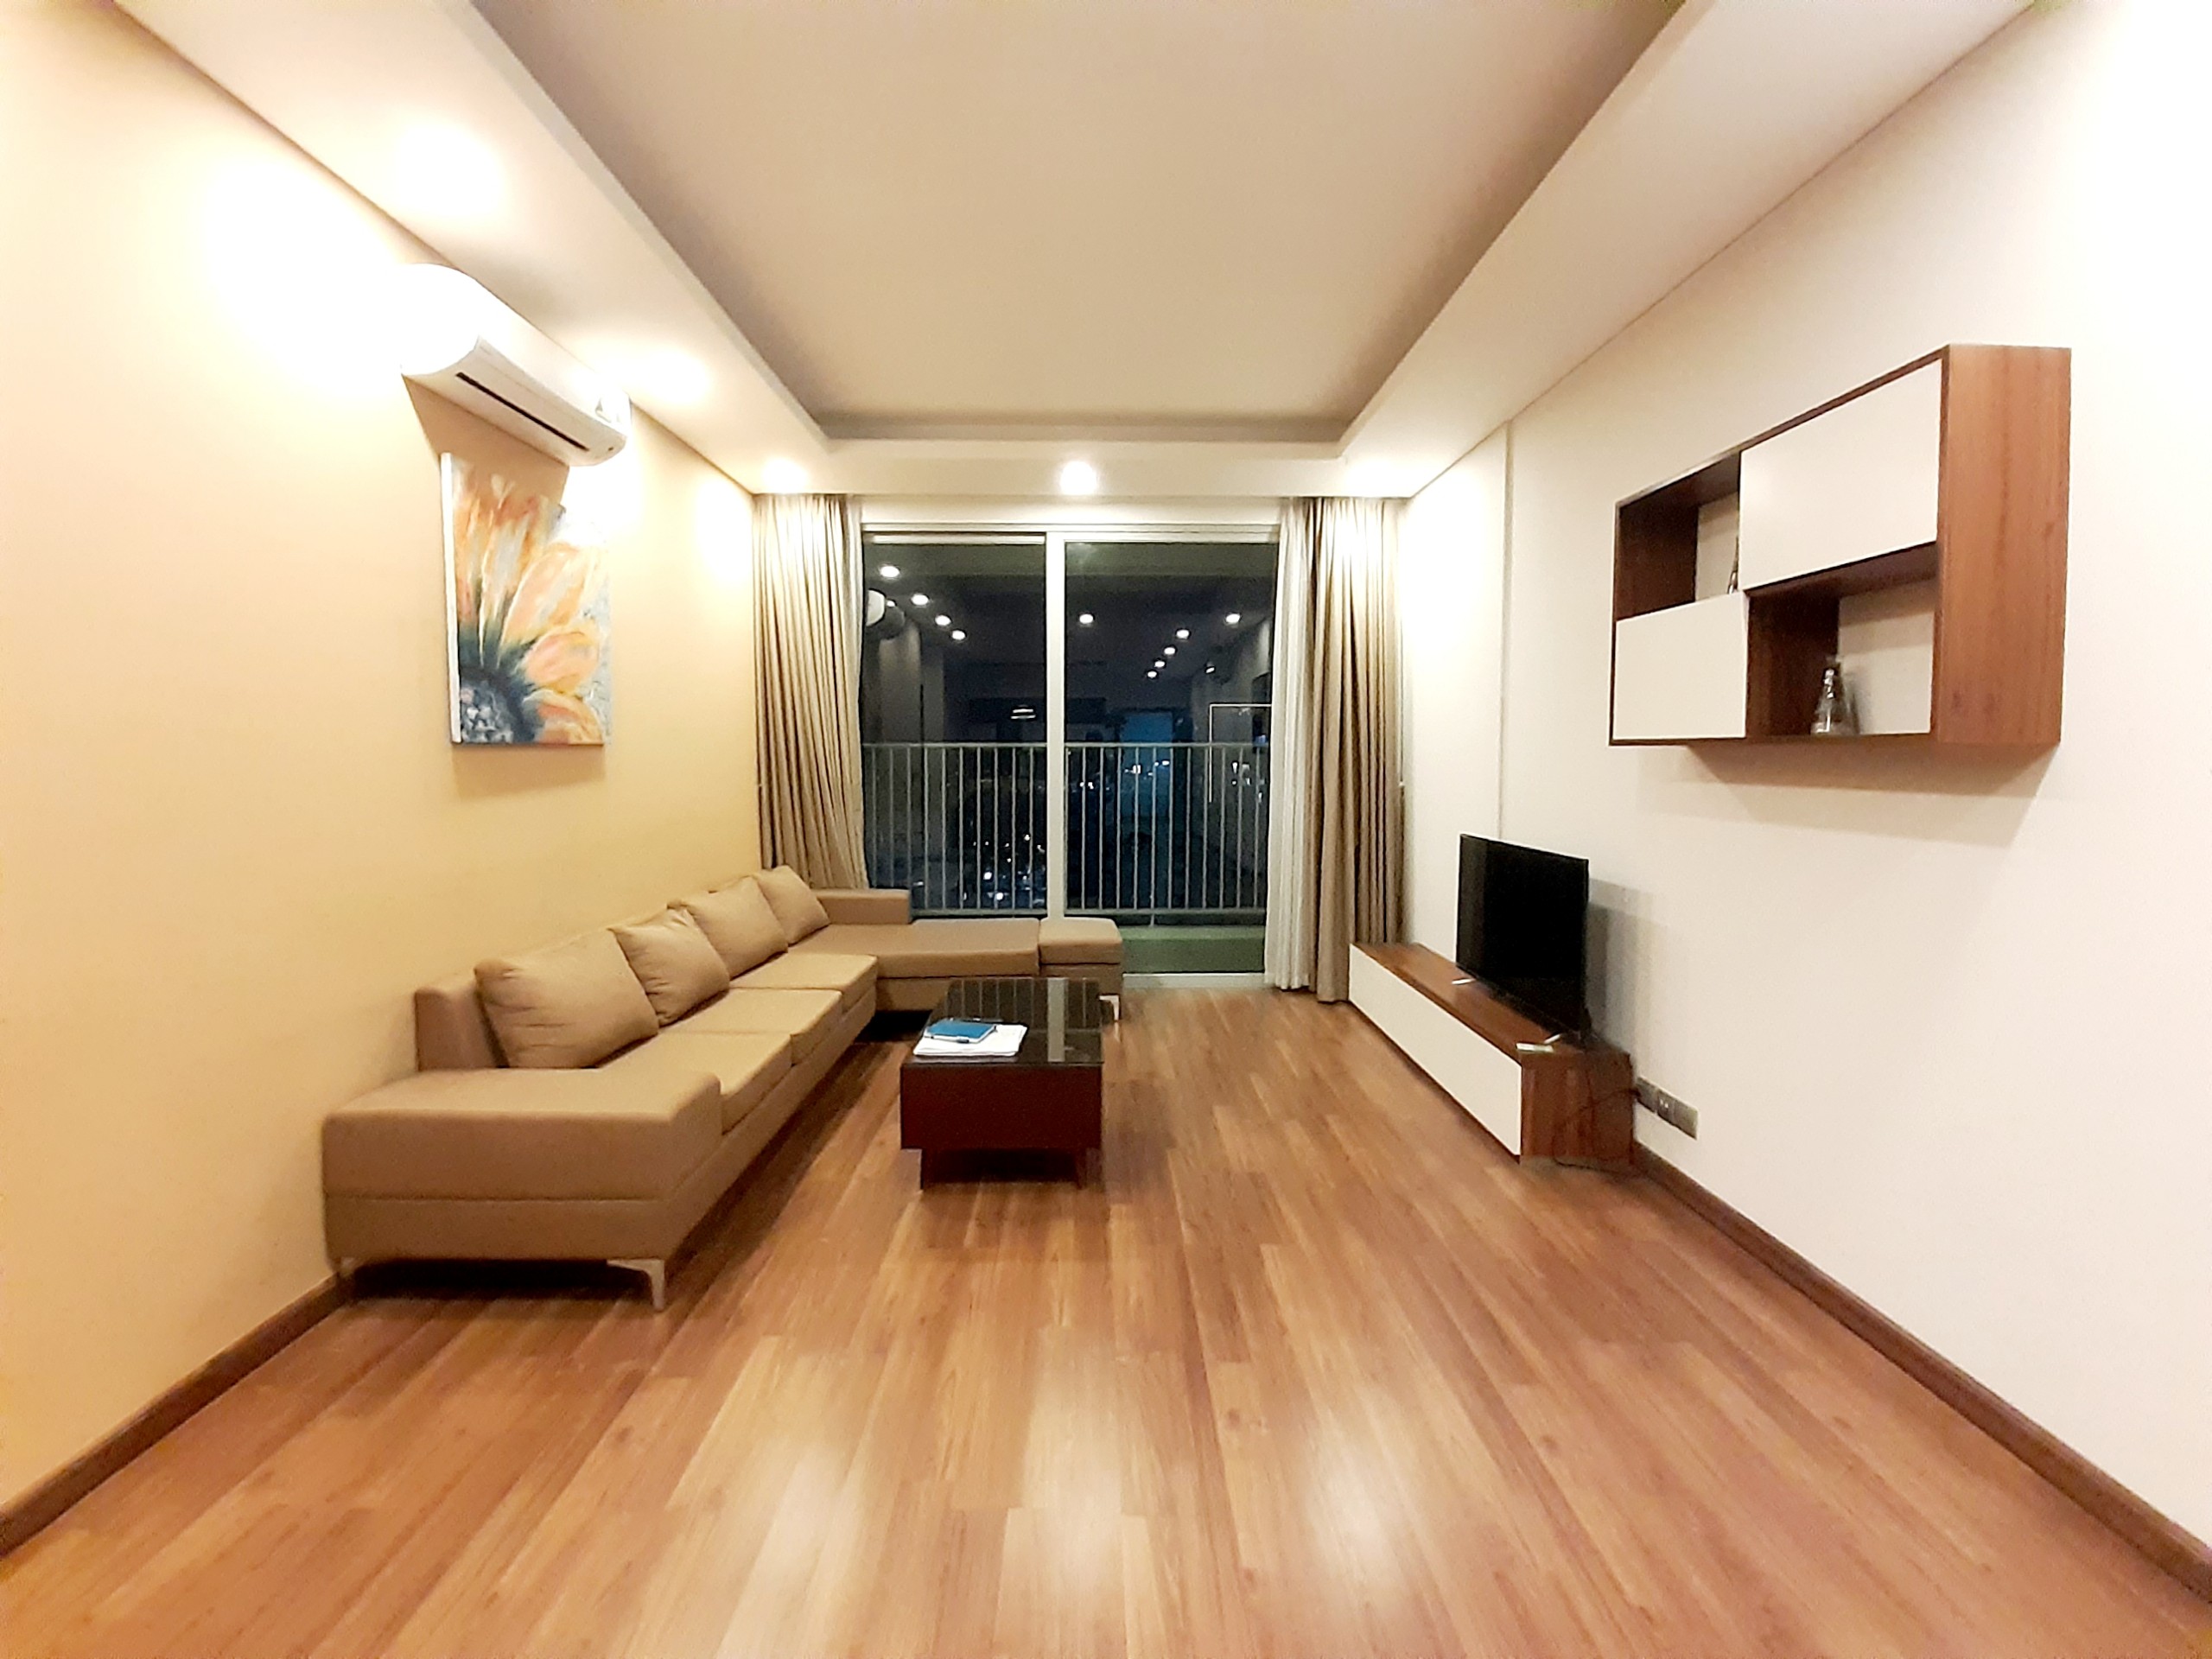 $670 - 2BRs/2WCs apartment for rent in N03T2, Taseco Building, Diplomatic Corps, Ngoai Giao Doan Hanoi